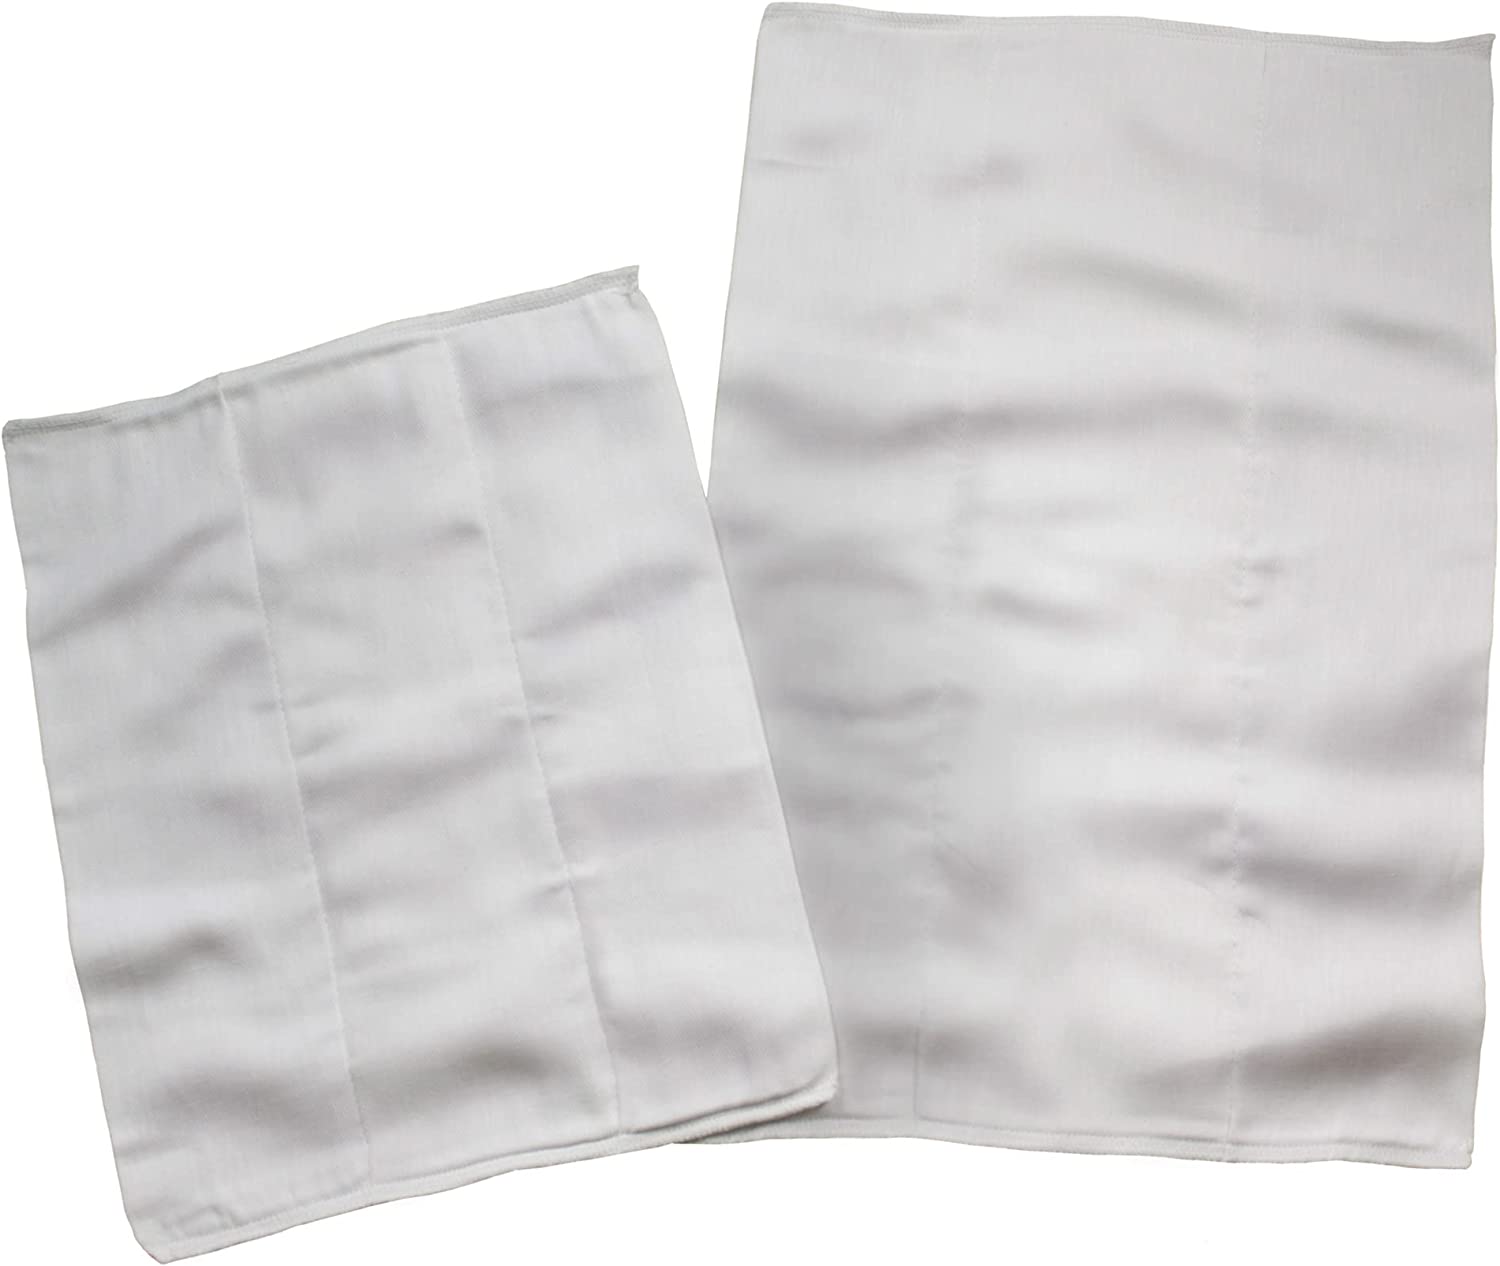 OsoCozy – Chinese Prefolds Cloth Diapers 1 Dozen – Perfect for Burp Cloths or Diapers. Soft and Absorbent for Baby Made of 100% Cotton- Fits 7-15 Lbs. – Size: Infant 4x6x4, 12×16 inches.